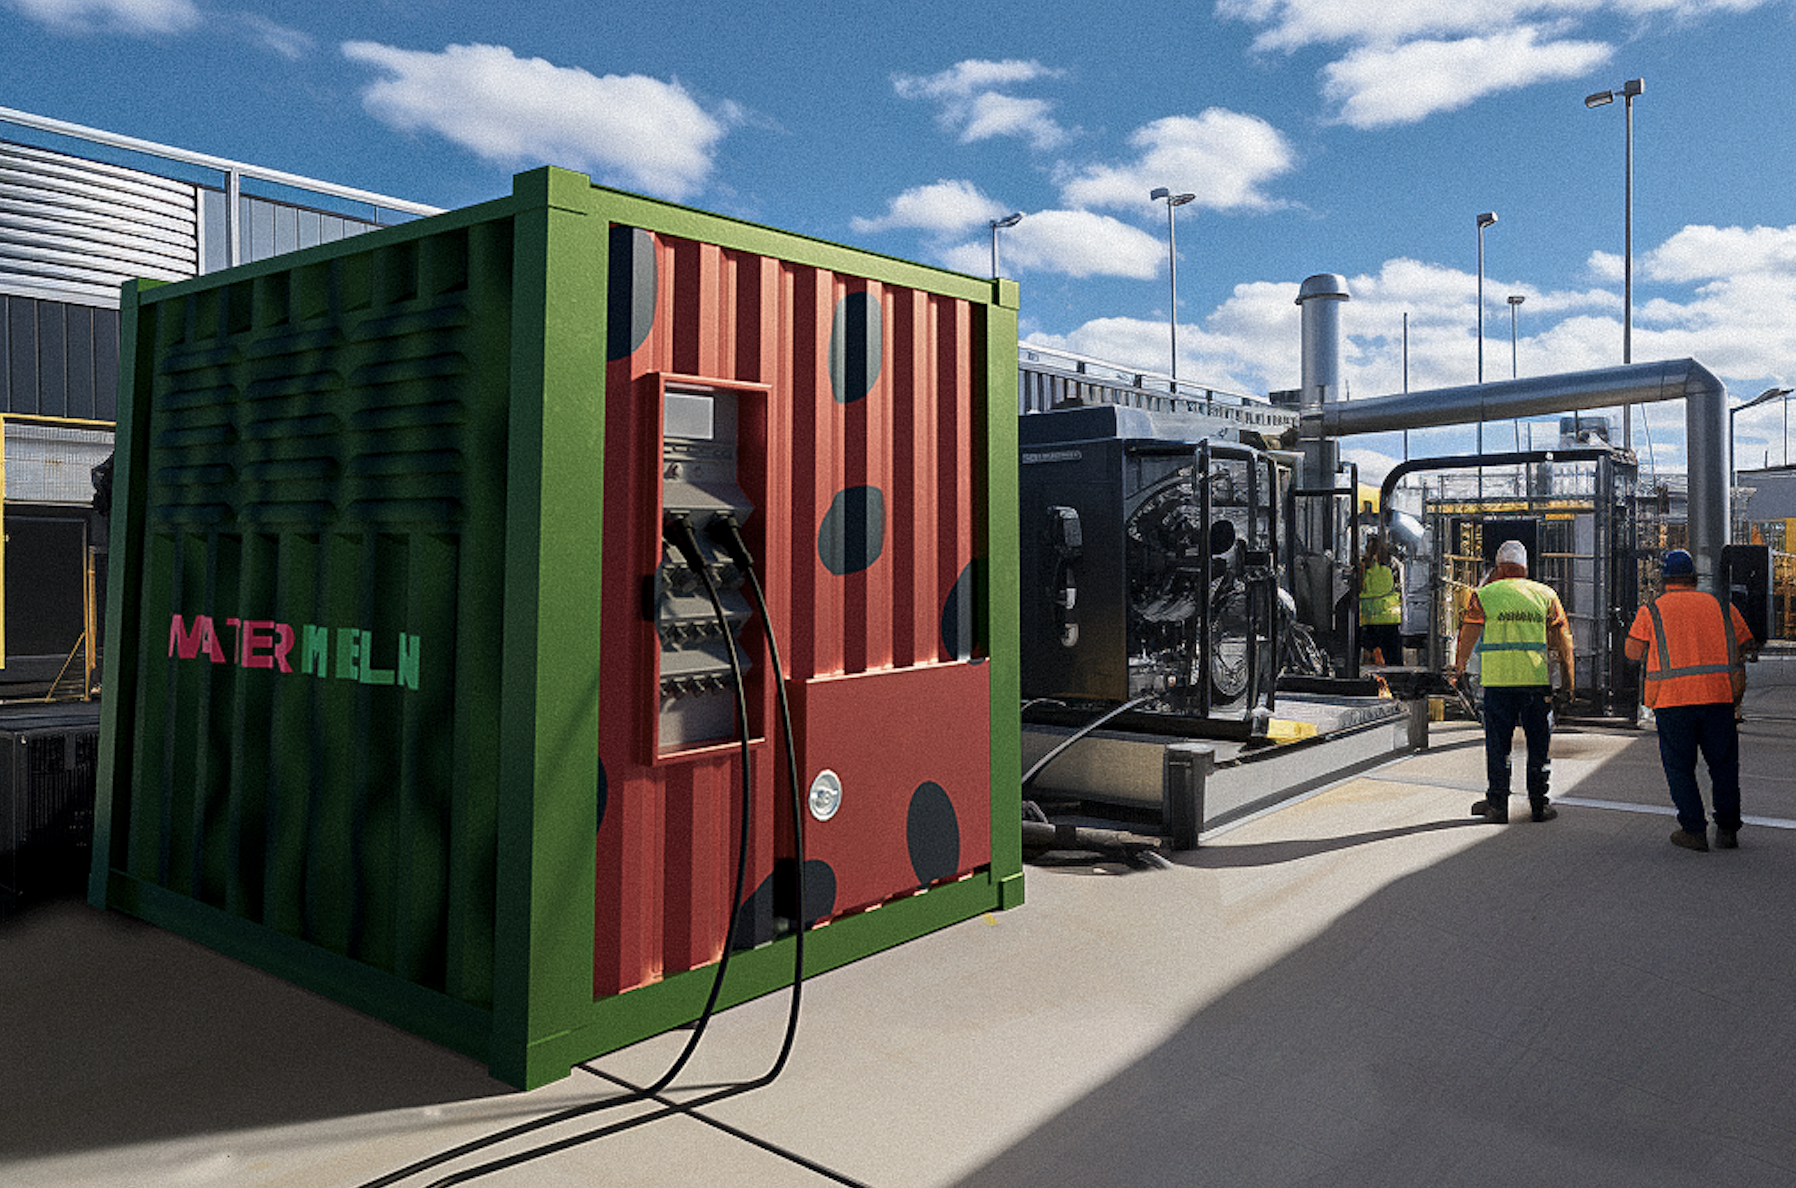 Watermeln generator at industrial site showcasing technology